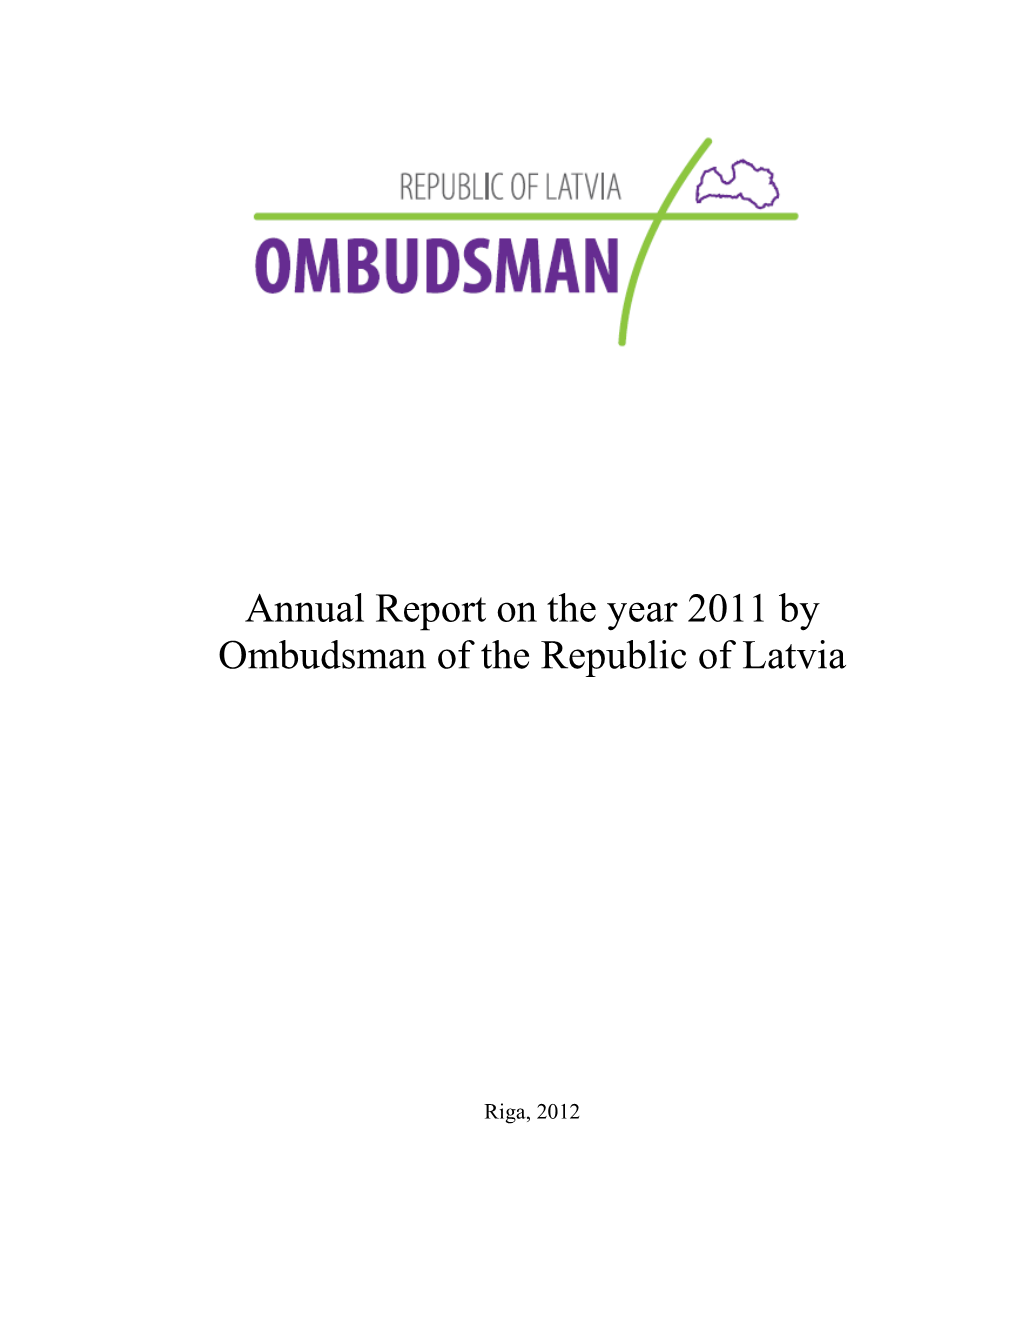 Annual Report on the Year 2011 by Ombudsman of the Republic of Latvia